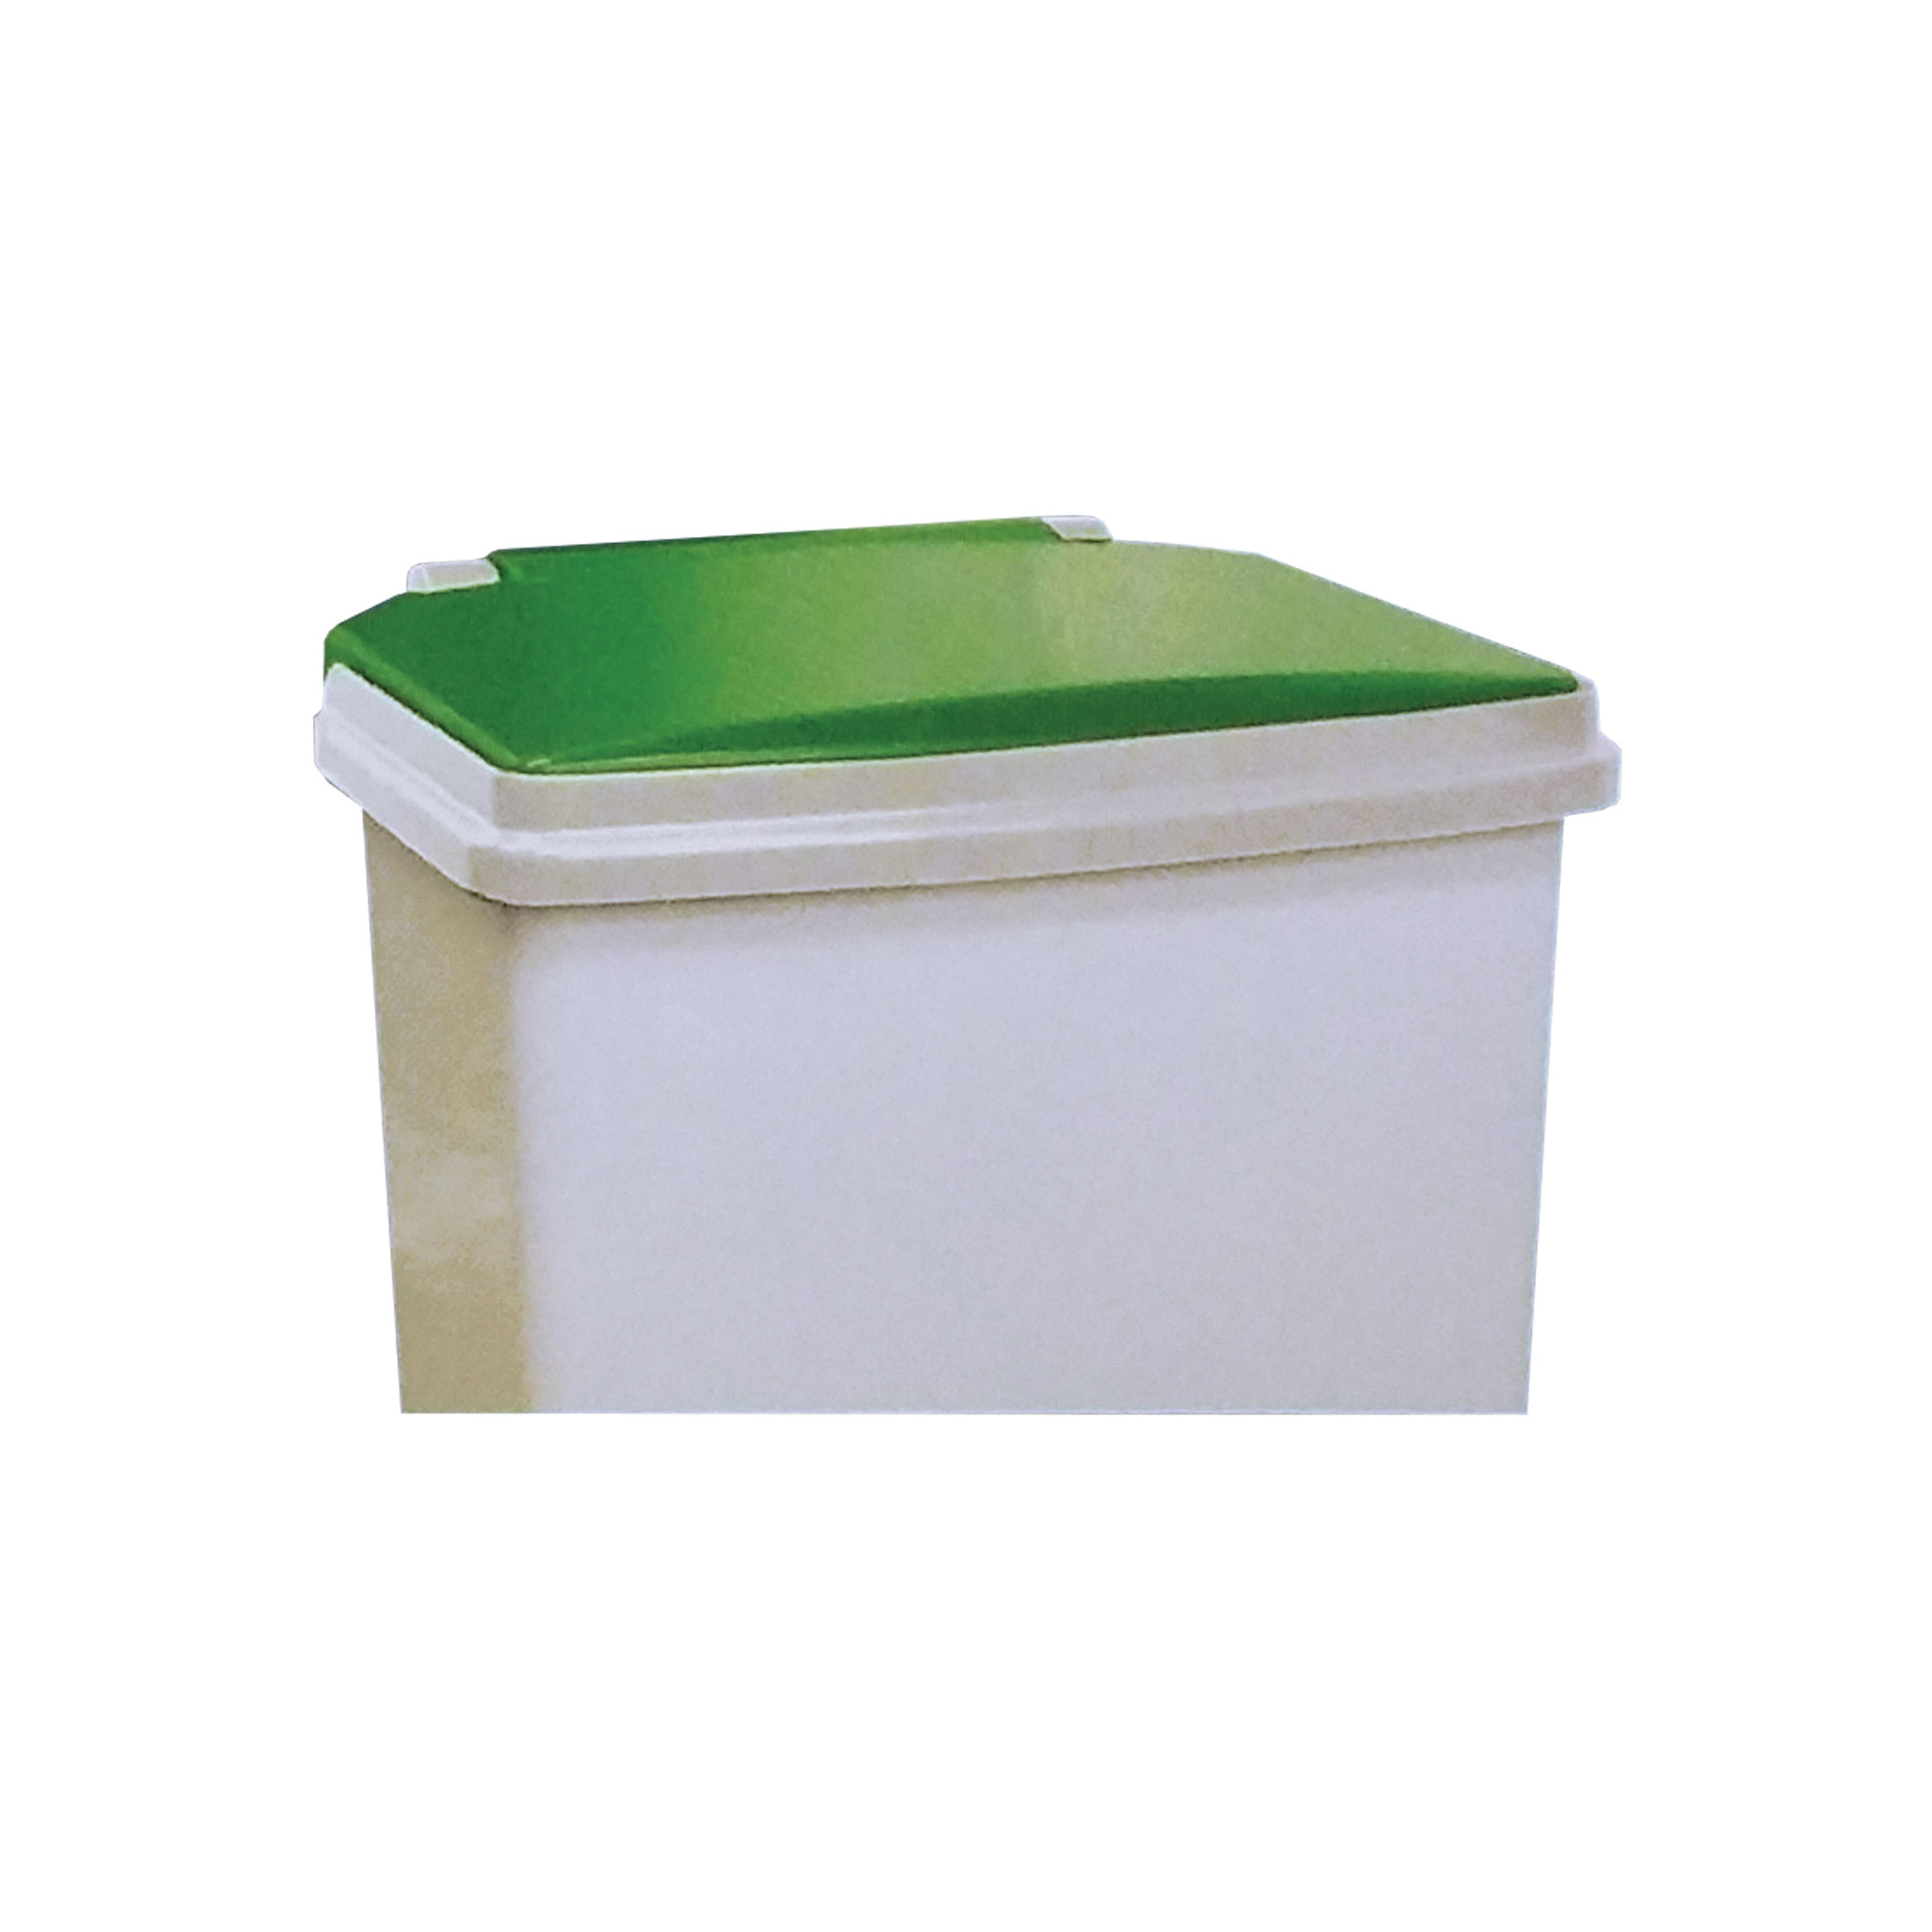 Green Replacement Lid For EB-3296 & EB-3297